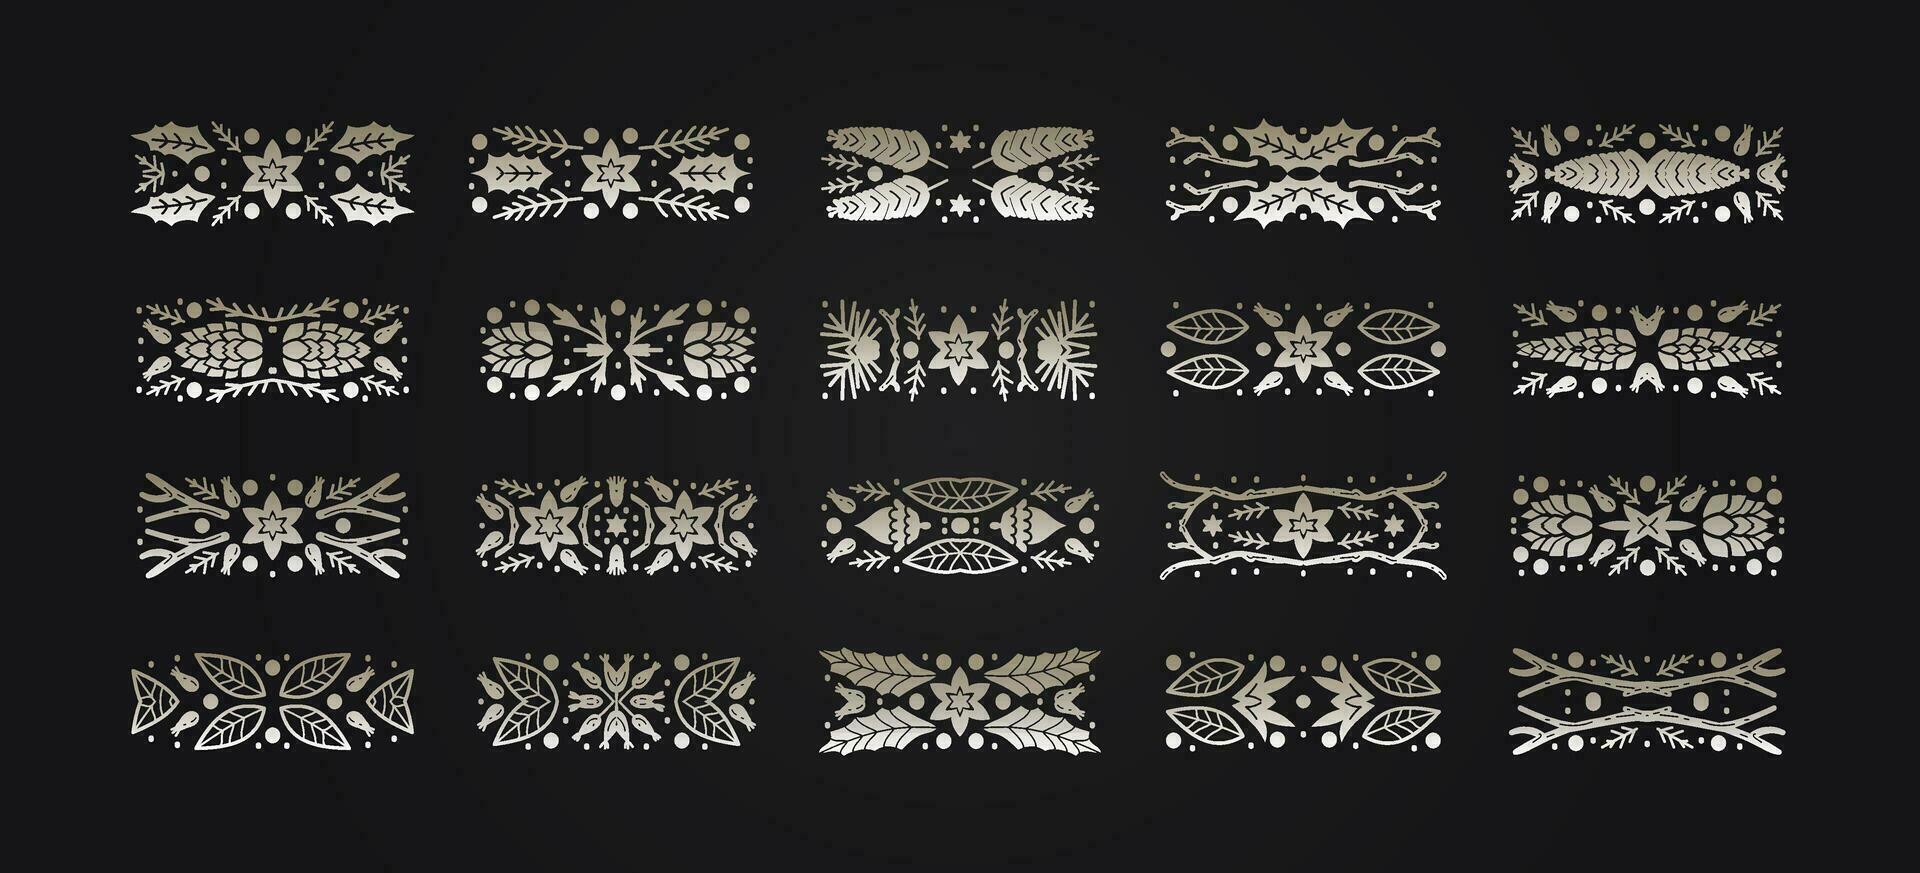 Luxury Christmas rectangular shapes set, abstract sketch winter design templates vector